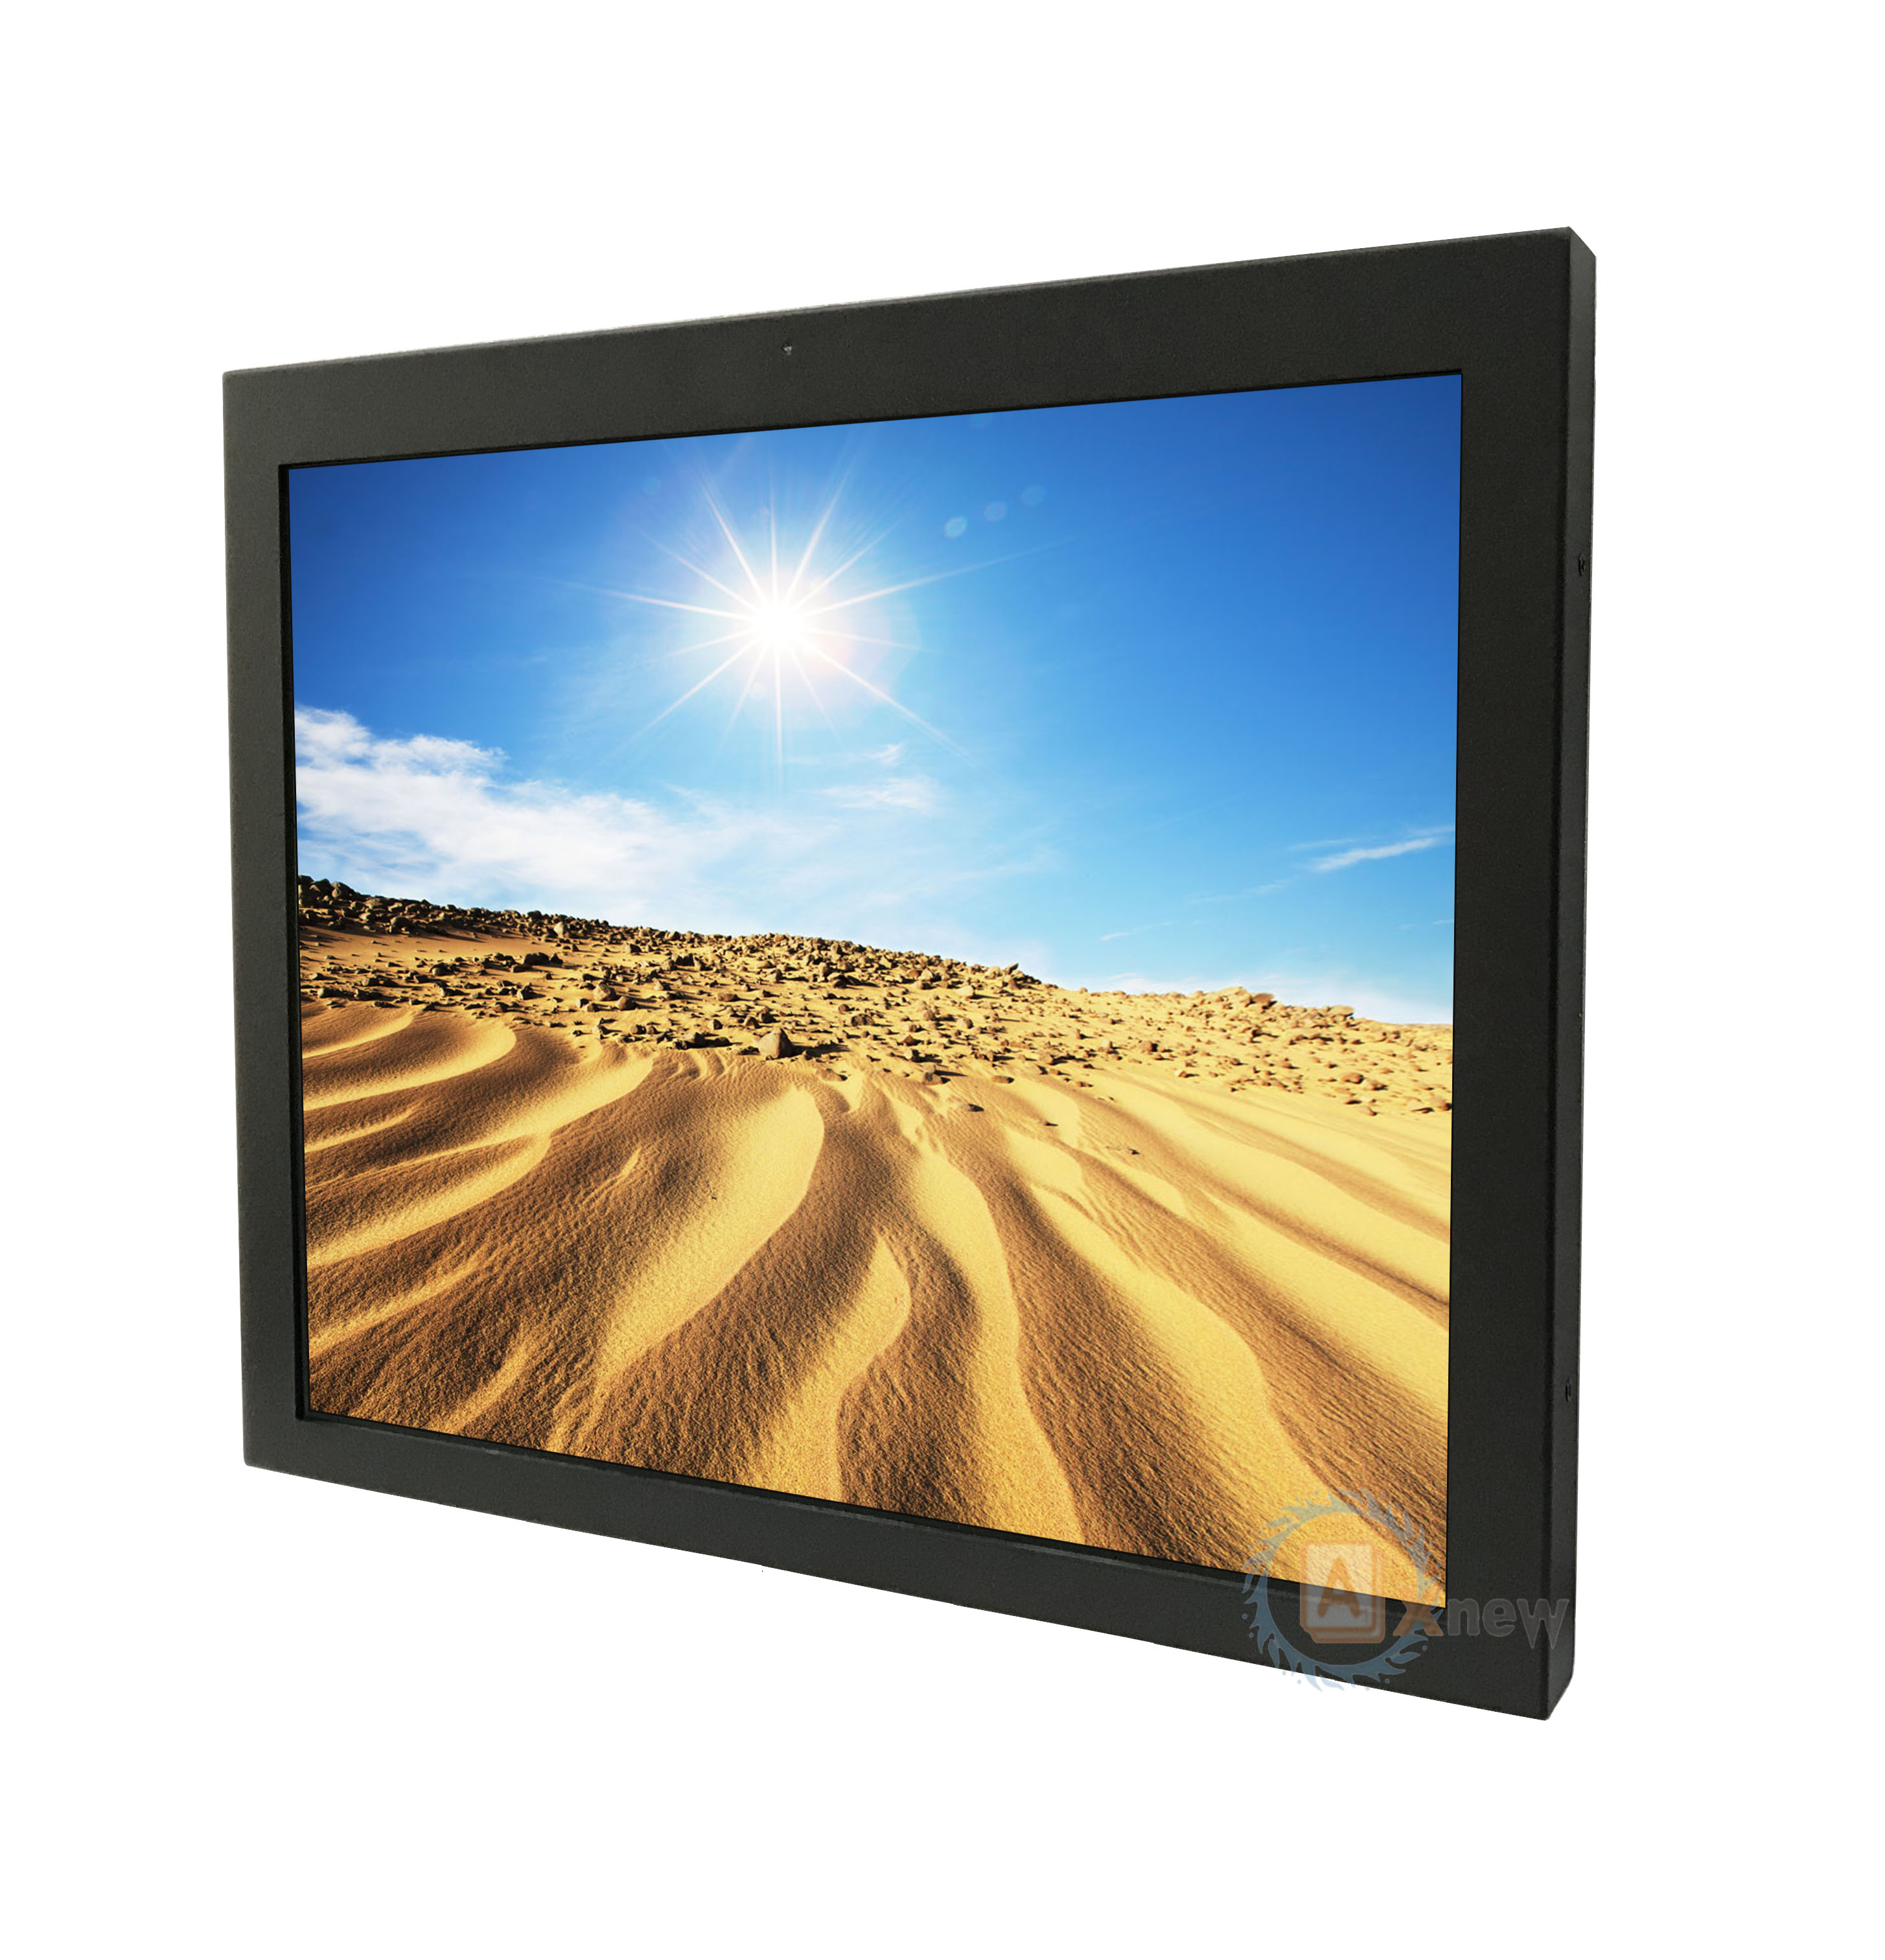 buy 19 inch Rugged Industrial Monitor on sales